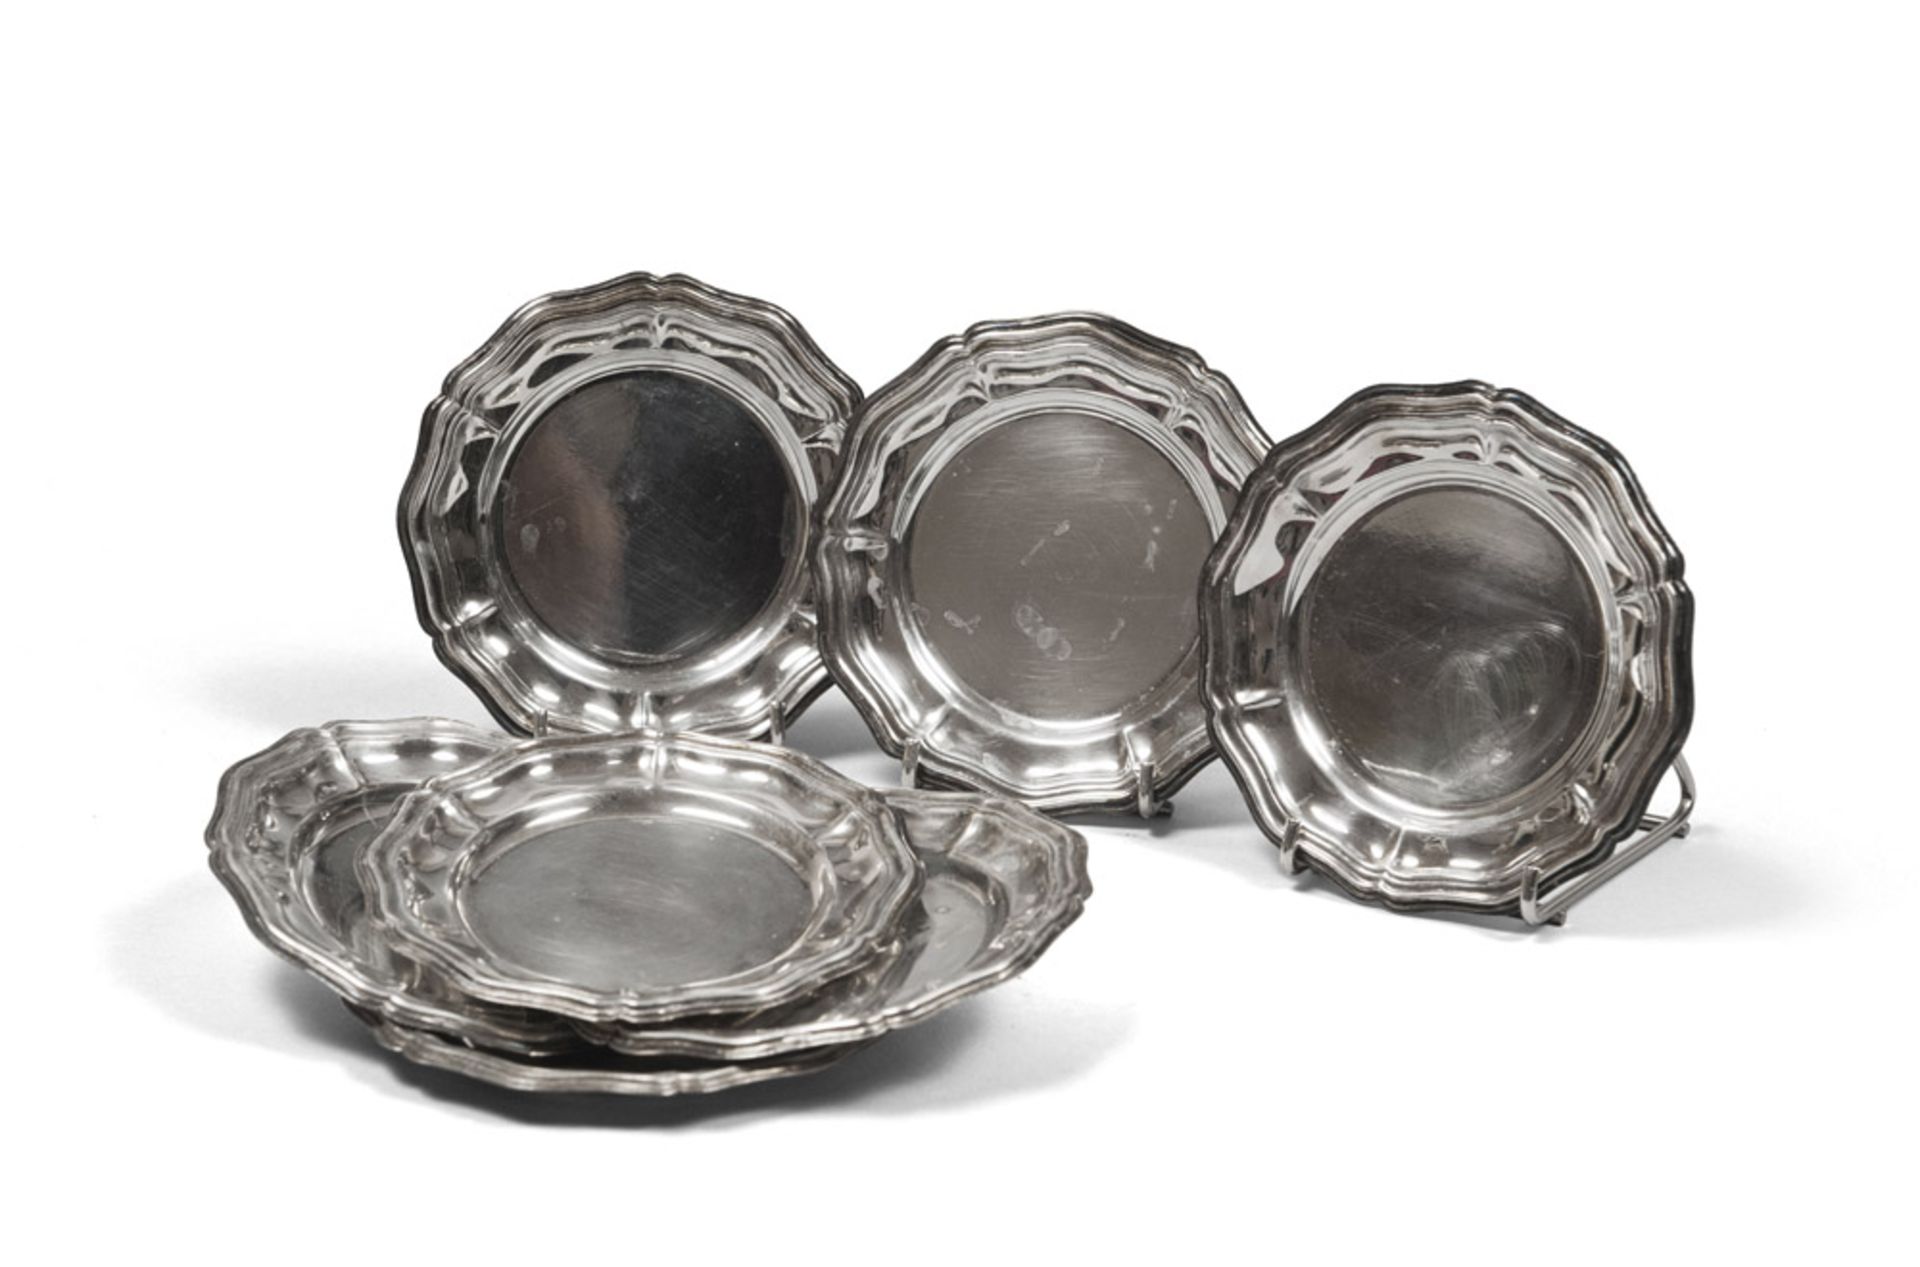 SEVEN SILVER SAUCERS, 20TH CENTURY nerved and embossed edge. Diameter 12 cm., weight 449 gr. SETTE